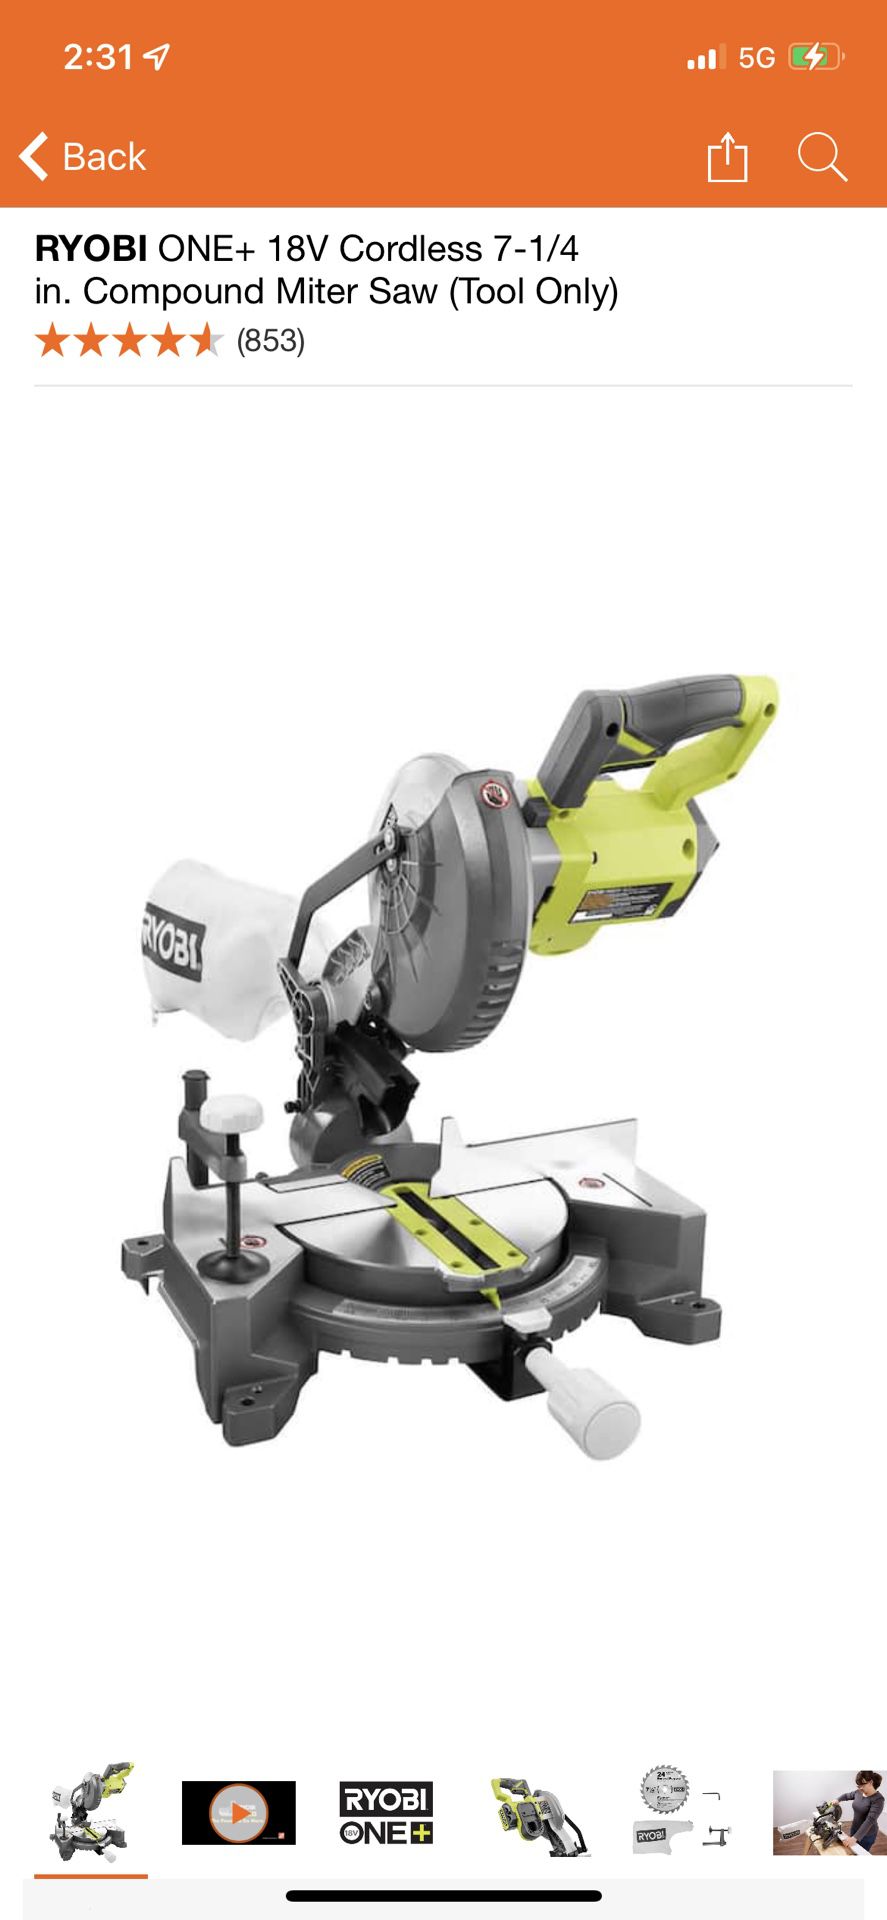 RYOBI ONE+ 18V Cordless 7-1/4 in. Compound Miter Saw (Tool Only) for Sale  in Hesperia, CA OfferUp